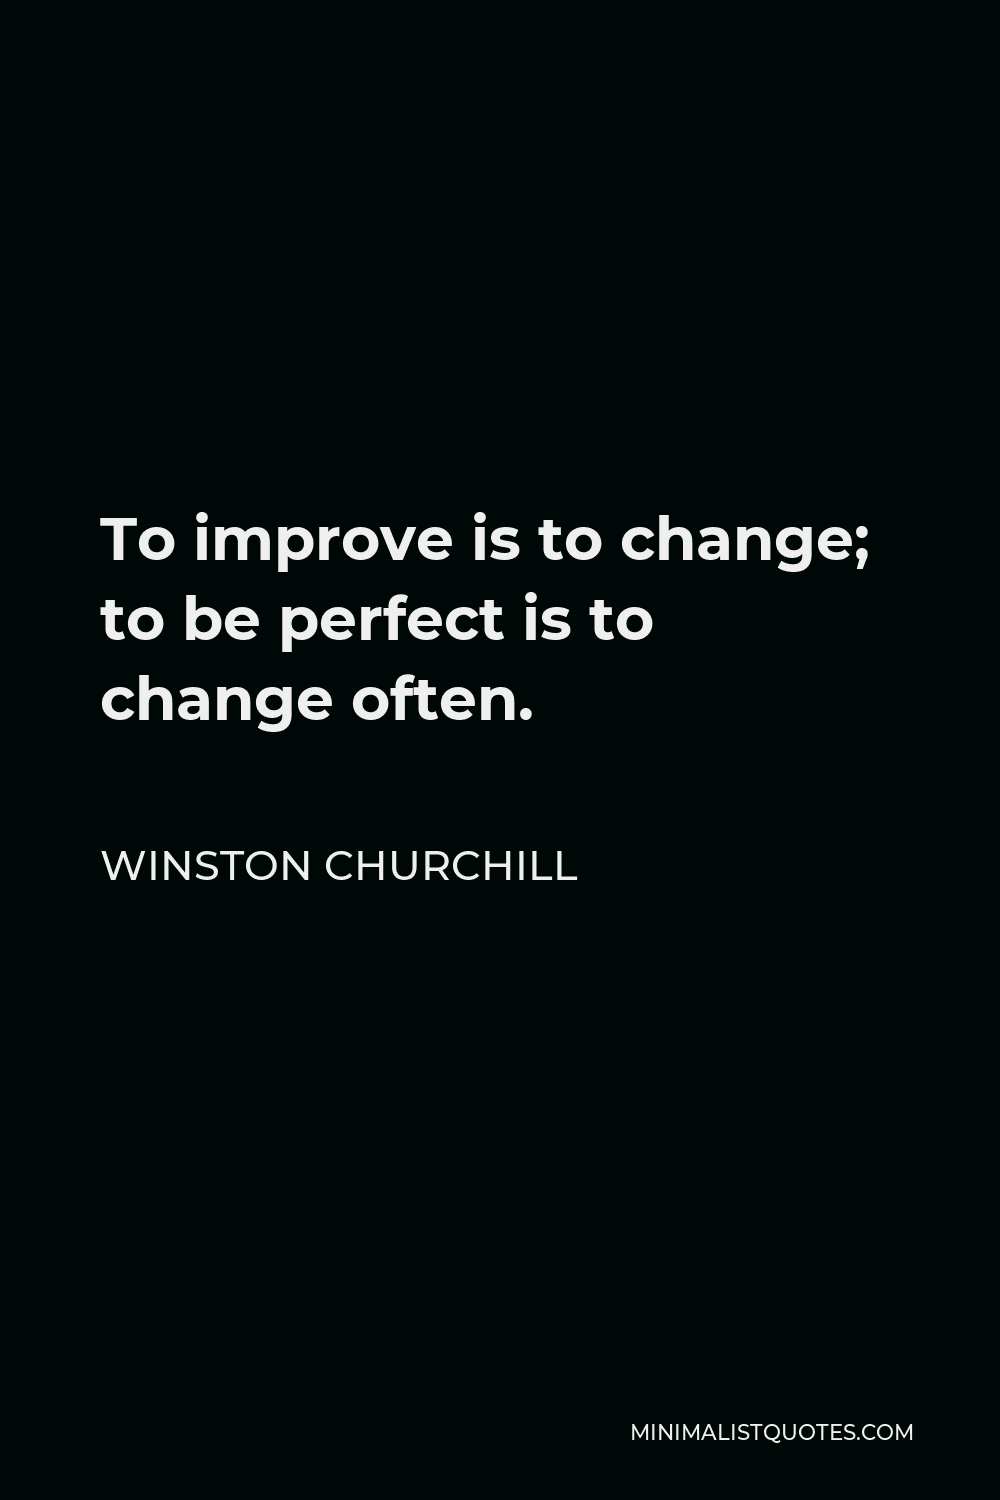 Winston Churchill Quote - To improve is to change; to be perfect is to change often.